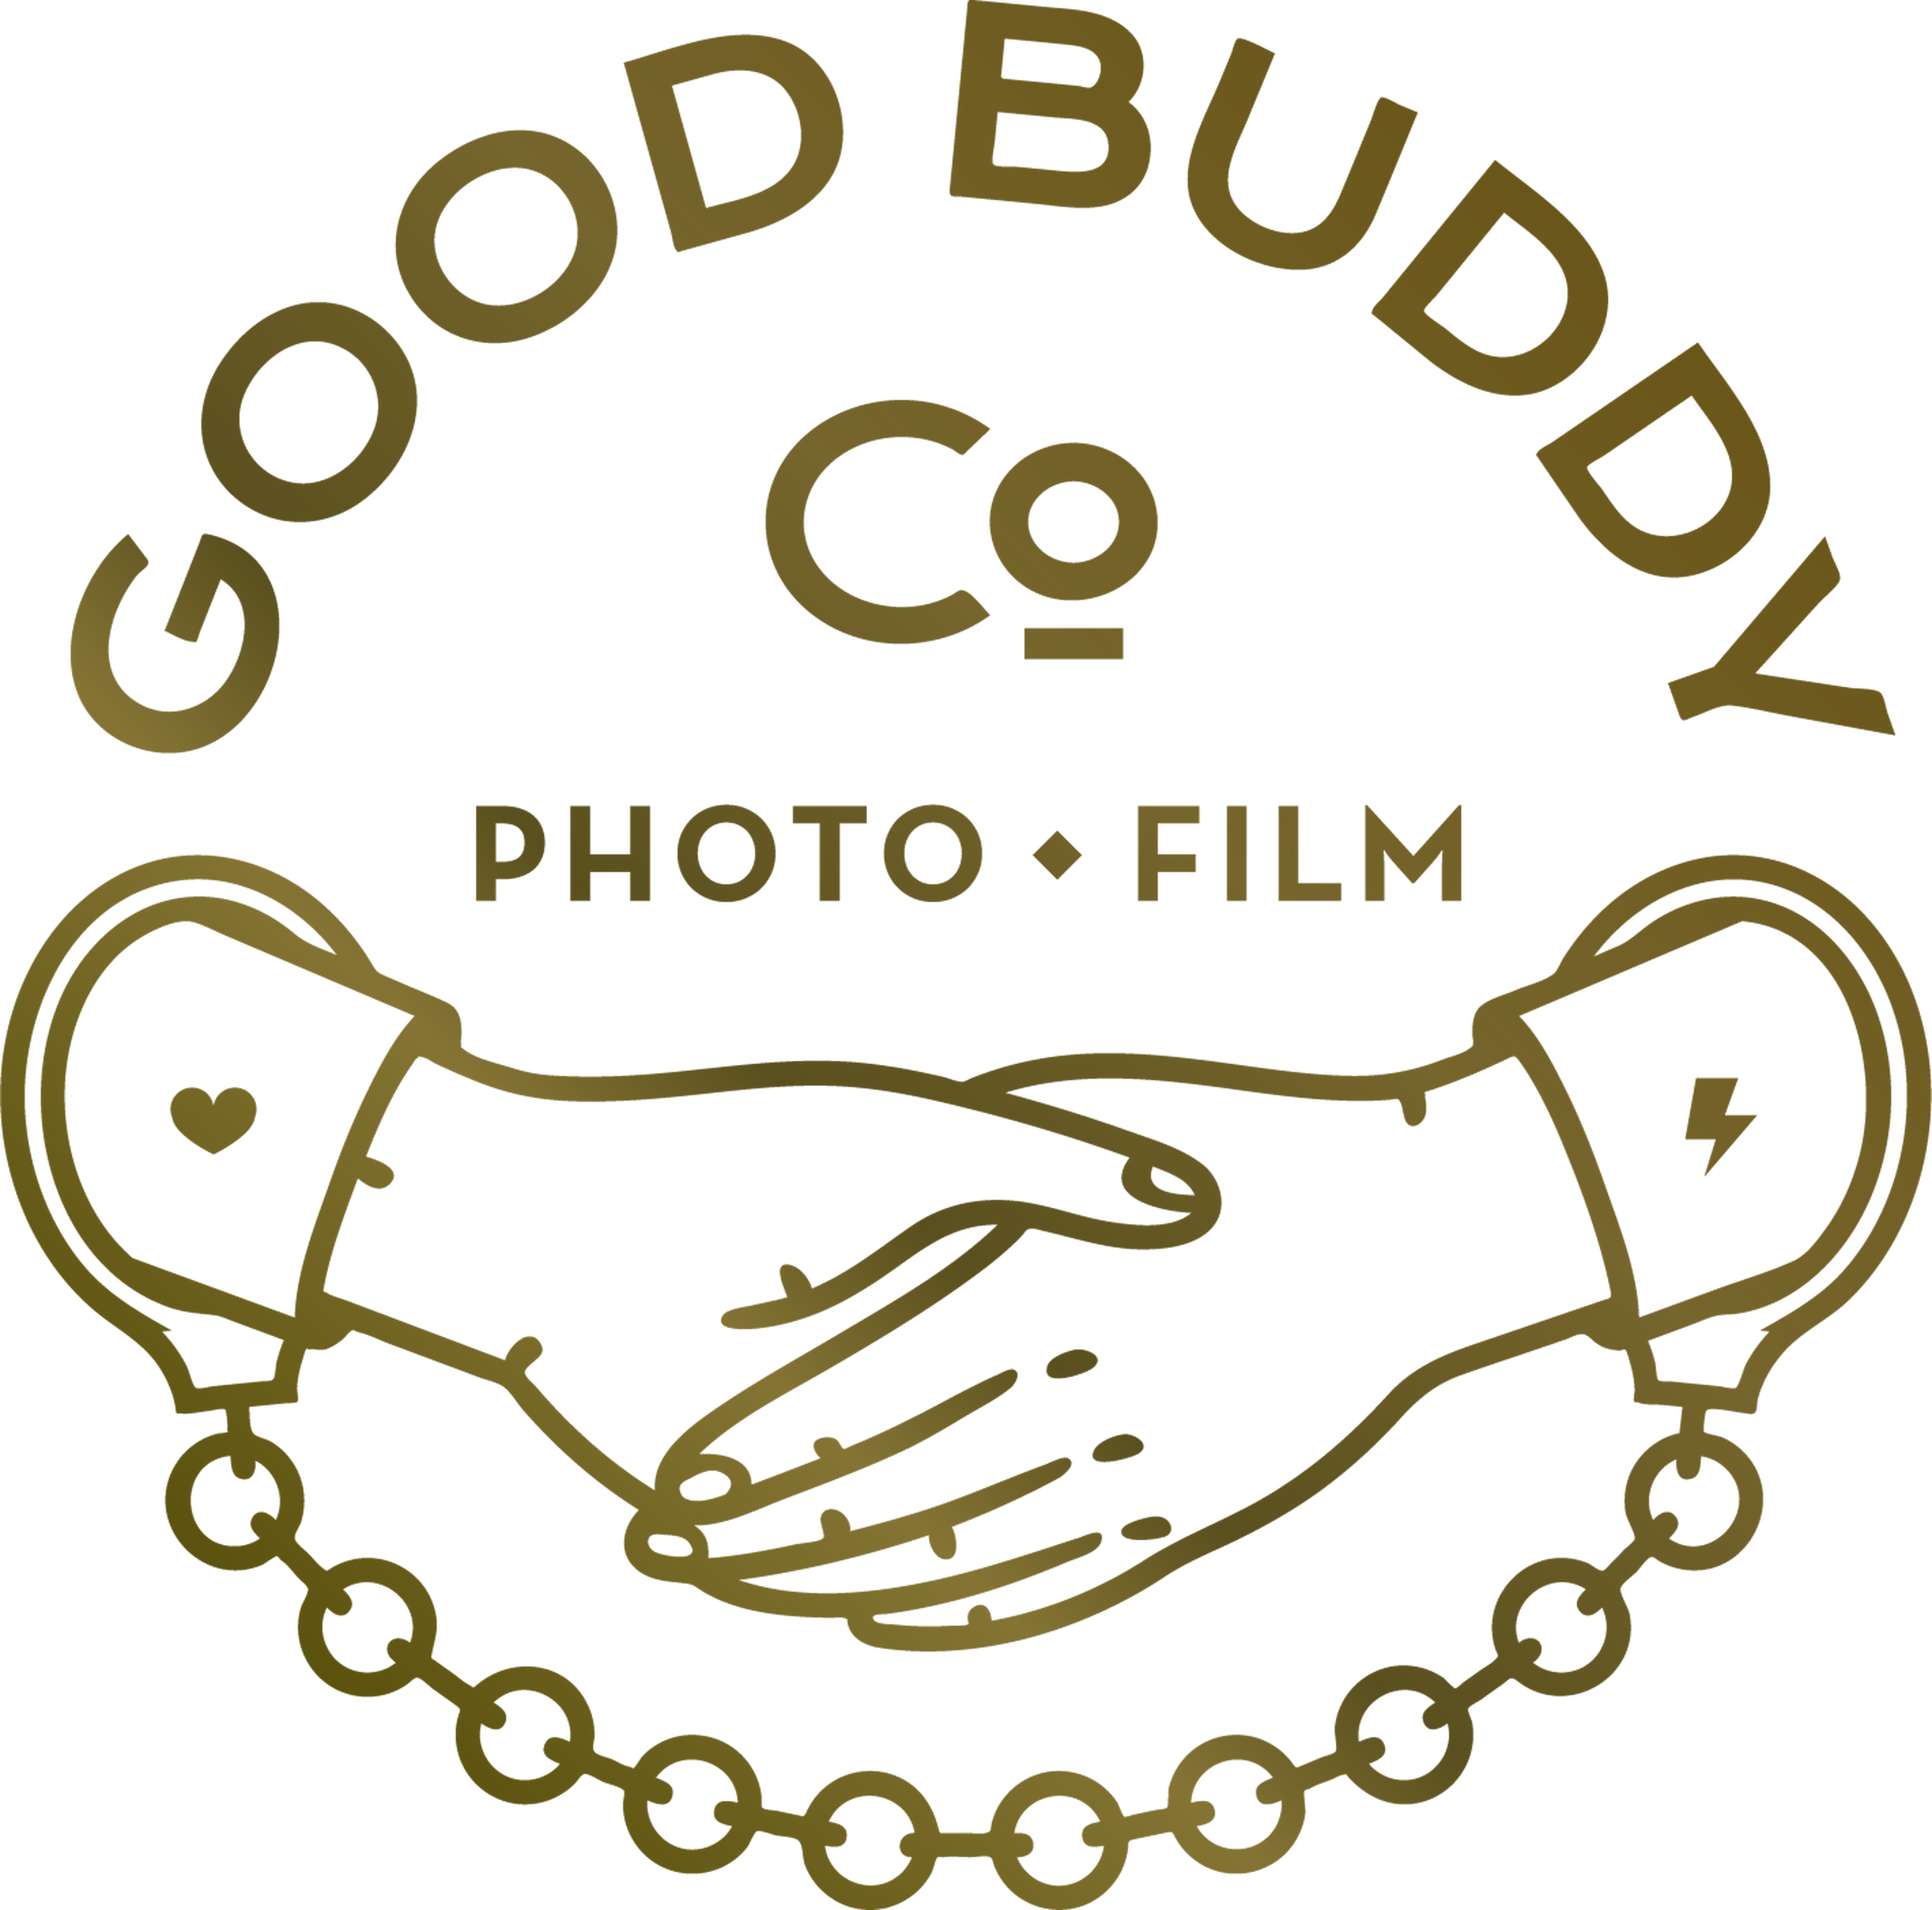 Good Buddy -- Photo + Film -- Branded Content Creation 